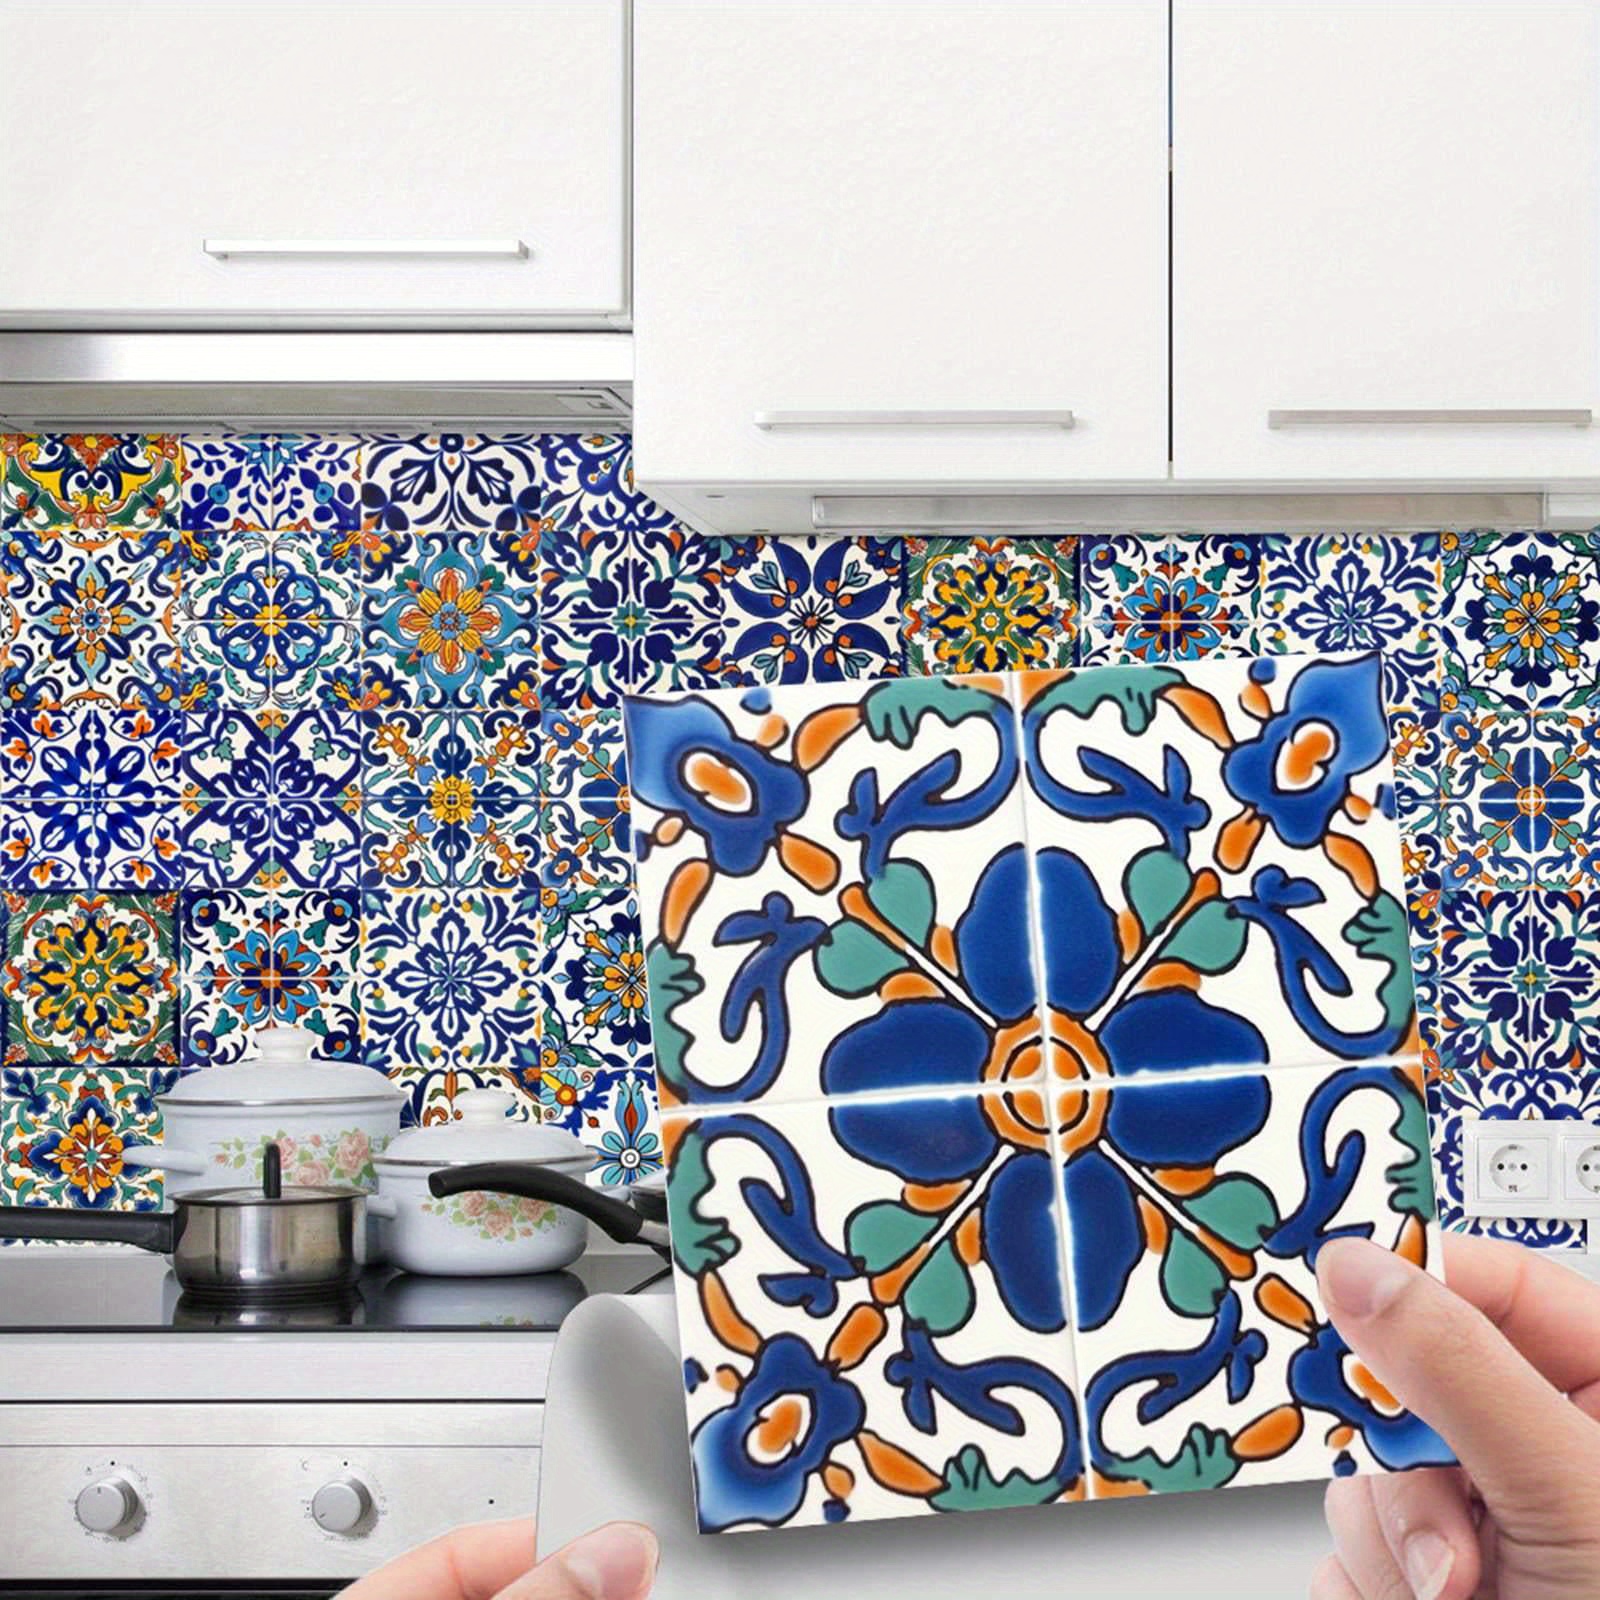 

24pcs 6x6in Decorative Tile Stickers, Peel And Stick Self Adhesive Removable Moroccan Tiles Backsplash Waterproof For Kitchen Bathroom Furniture Staircase Home Decor